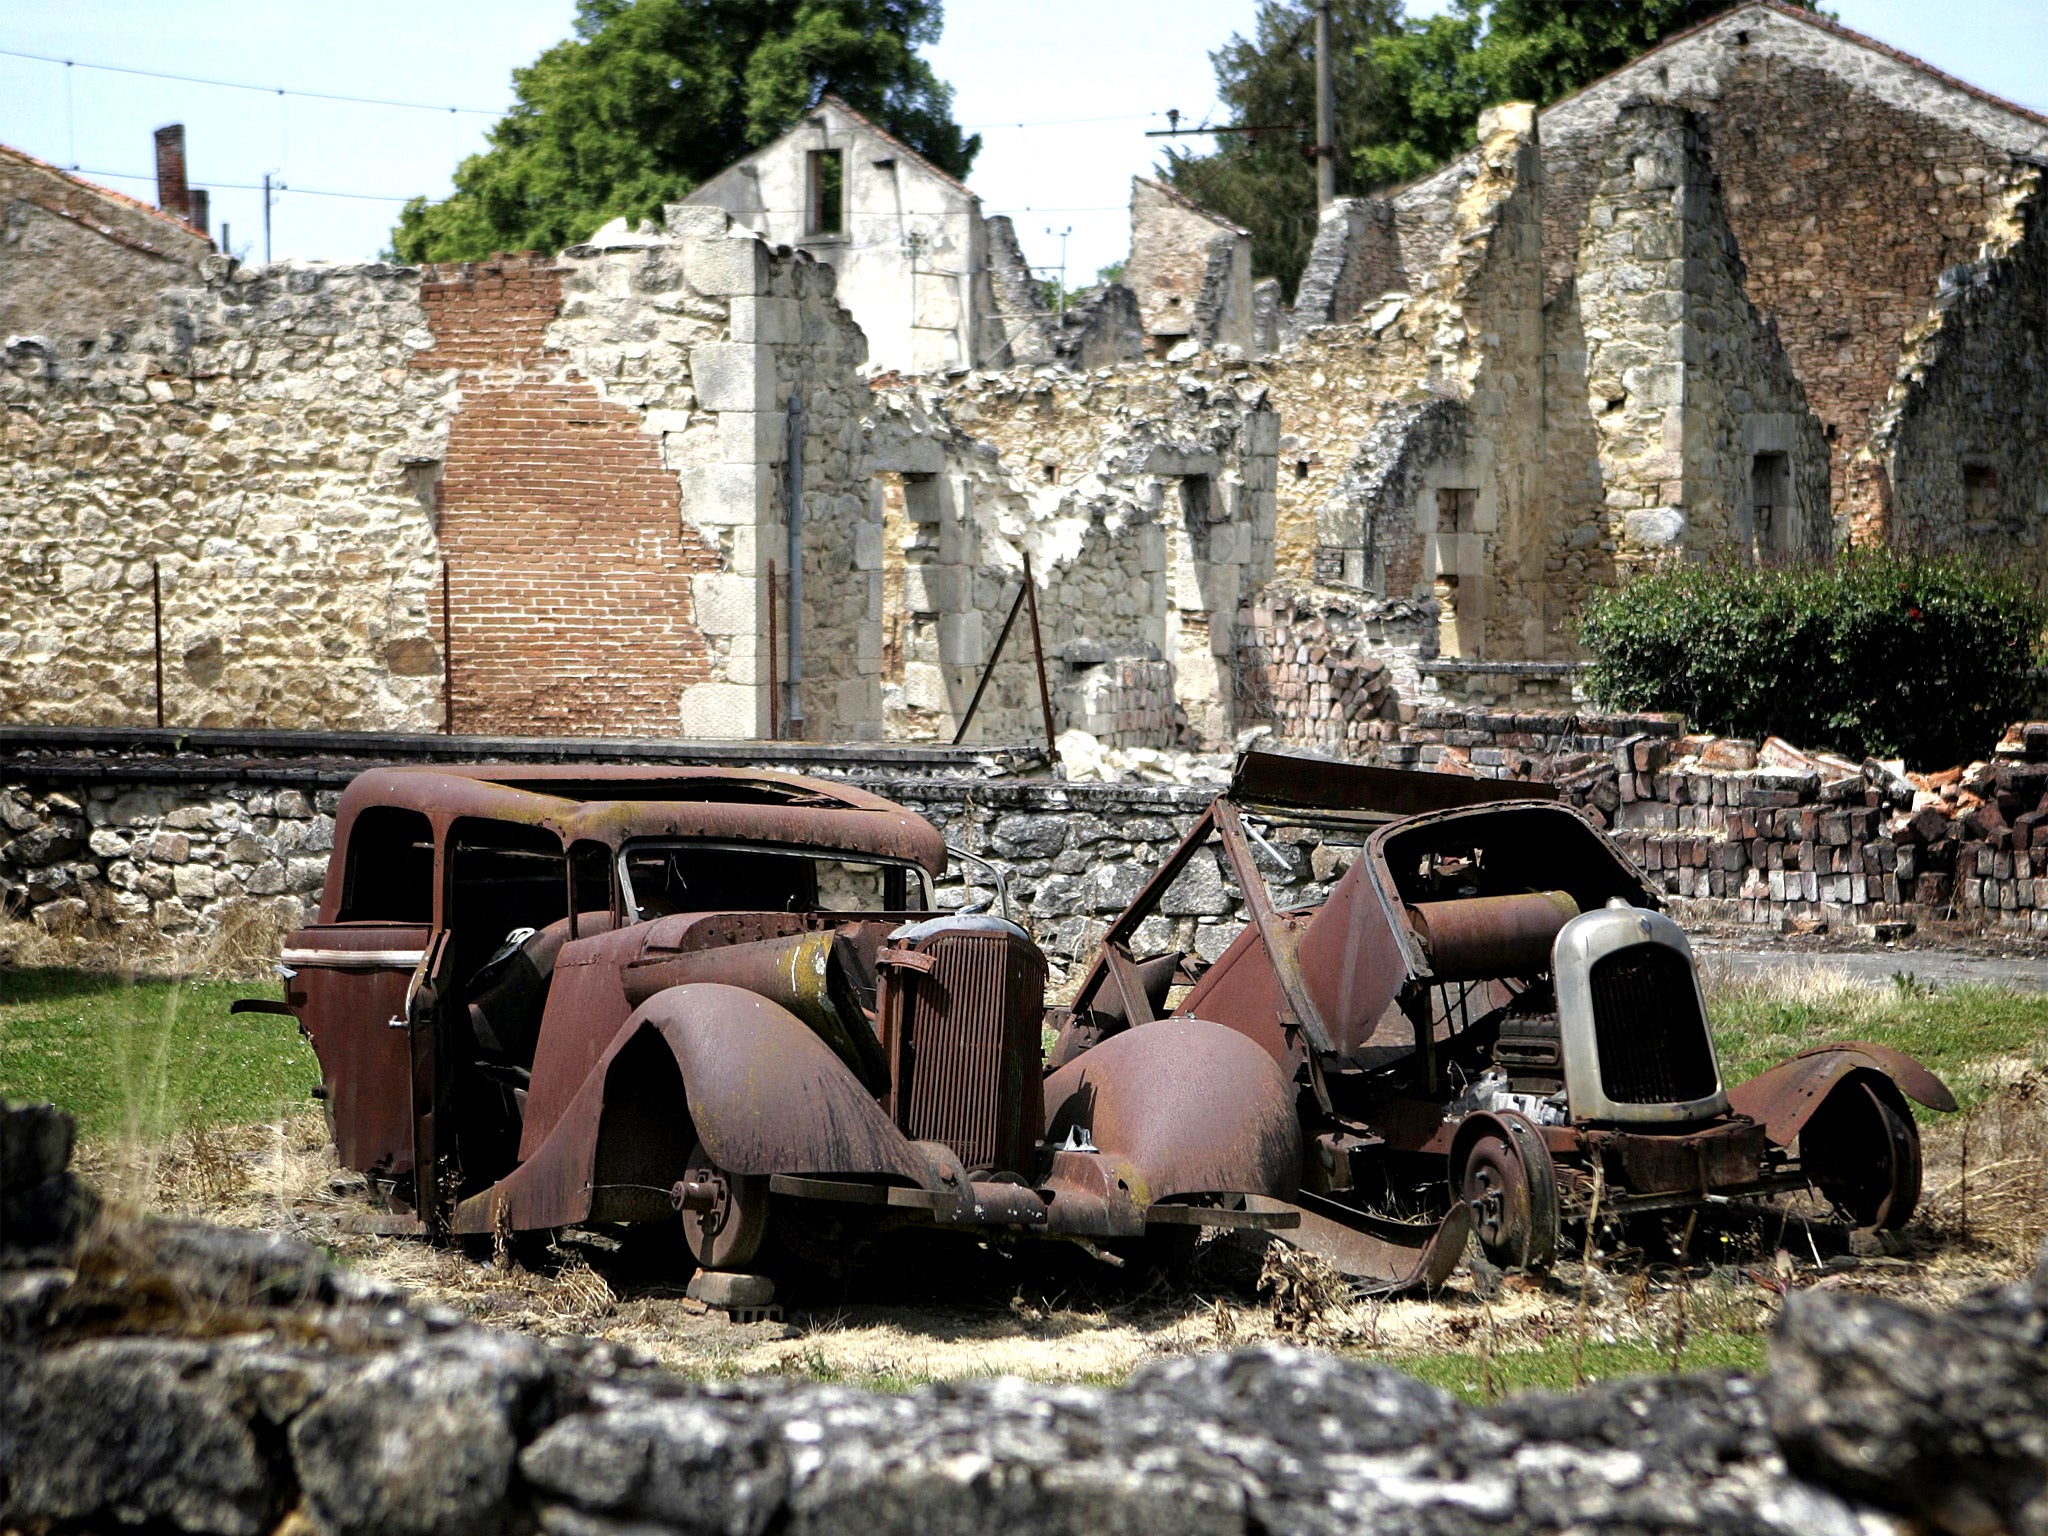 Remains of cars at the partially destroyed village of Oradour-sur-Glane, south-western France, where German SS Nazi troops massacred 642 people on June 10, 1944